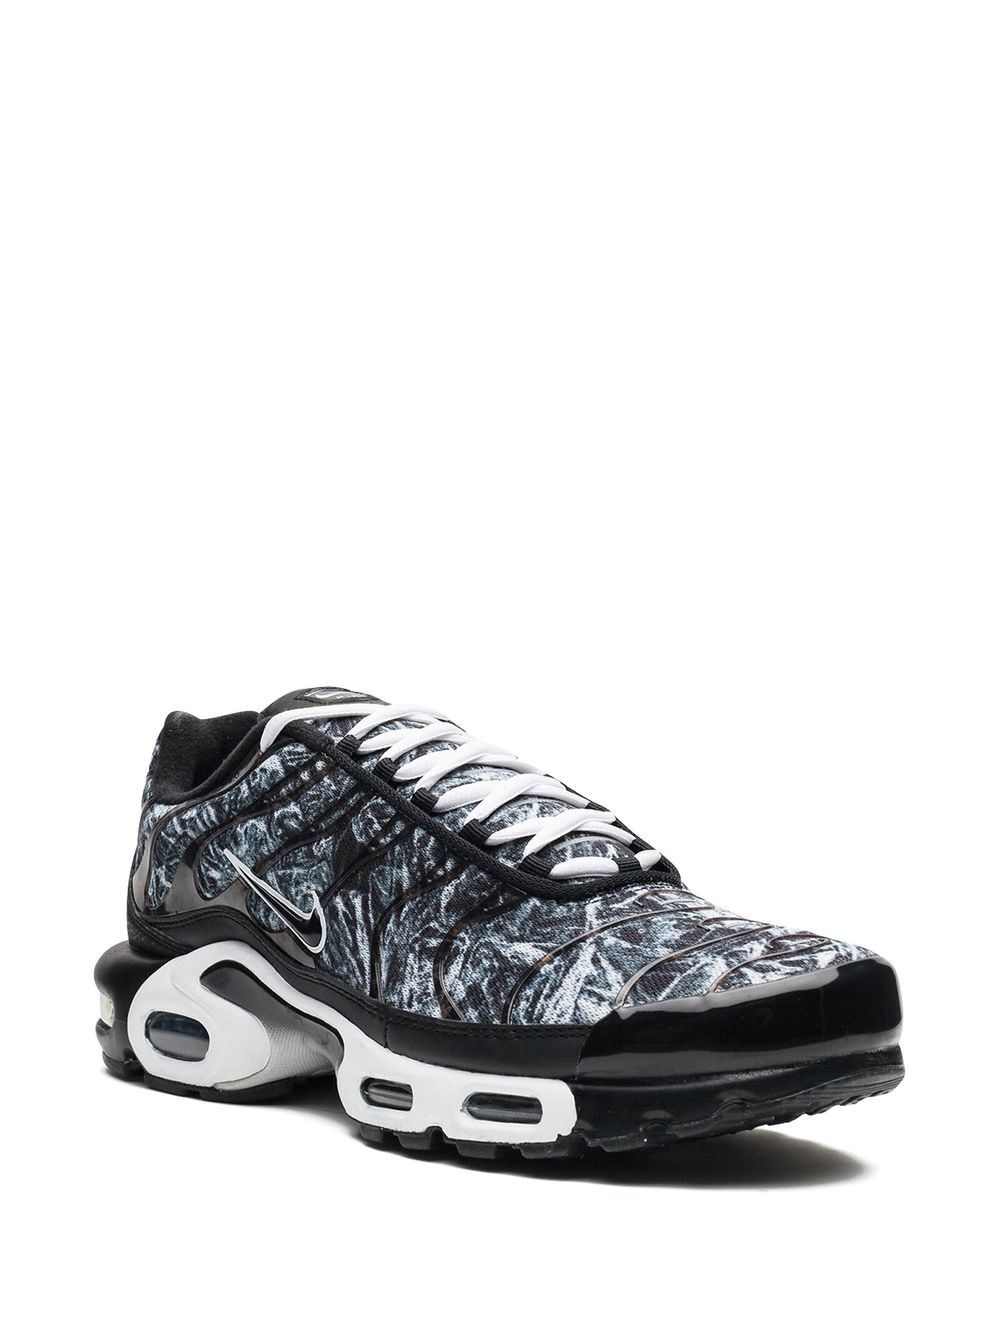 Air Max Plus AMP "Shattered Ice" sneakers - 2